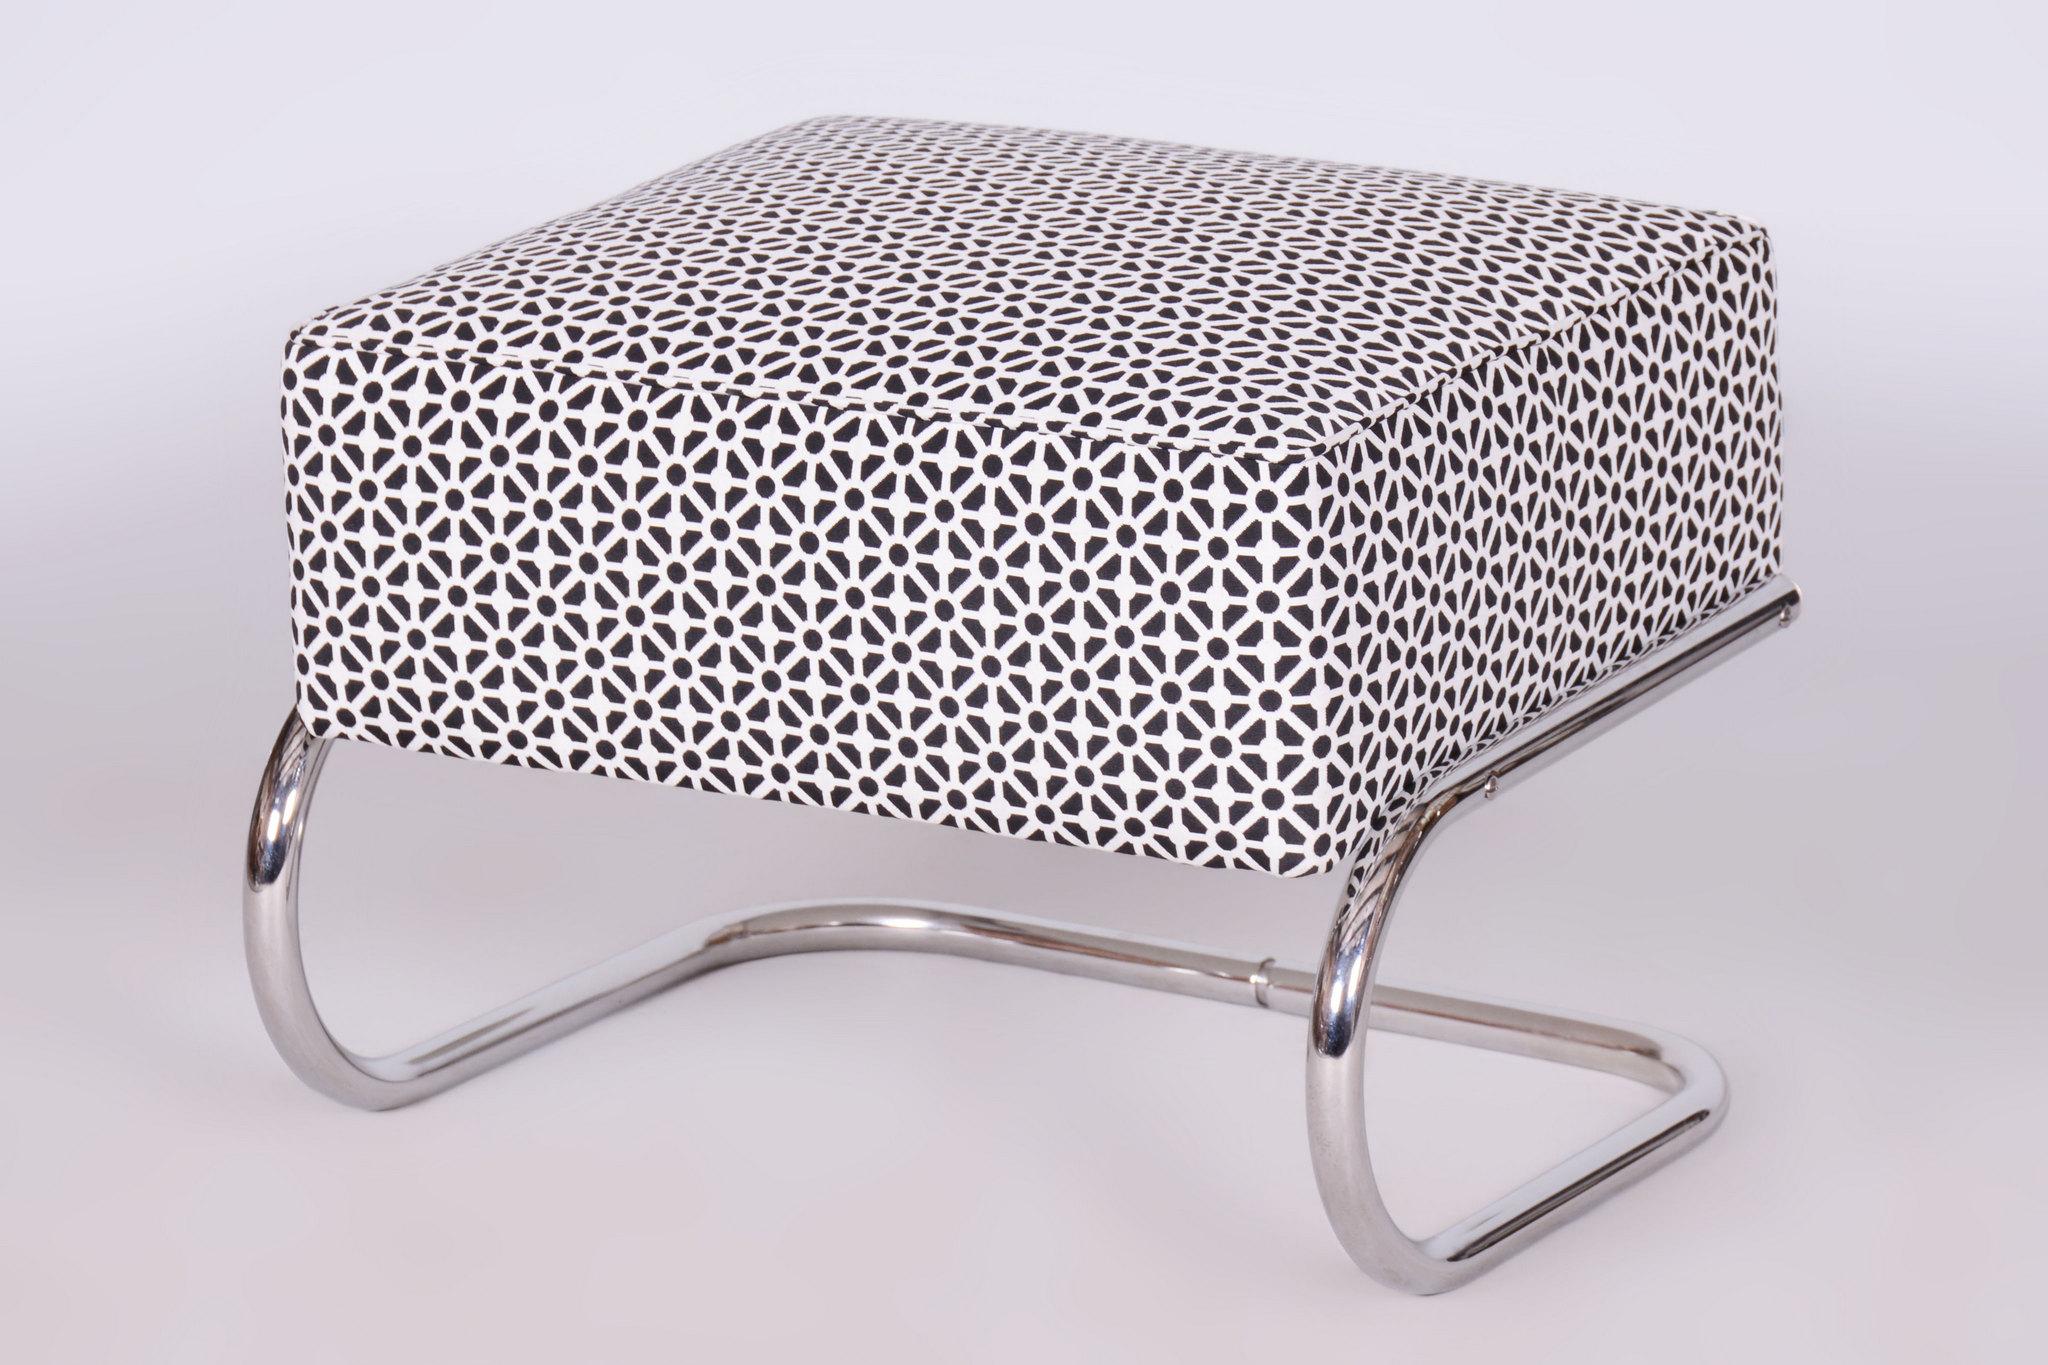 Designed by renowned Czech designer Robert Slezak. 

It has been reupholstered by our professional refurbishing team in Czechia. Please contact us to find out the details of its reupholstery.

The chrome parts have been cleaned and professionally